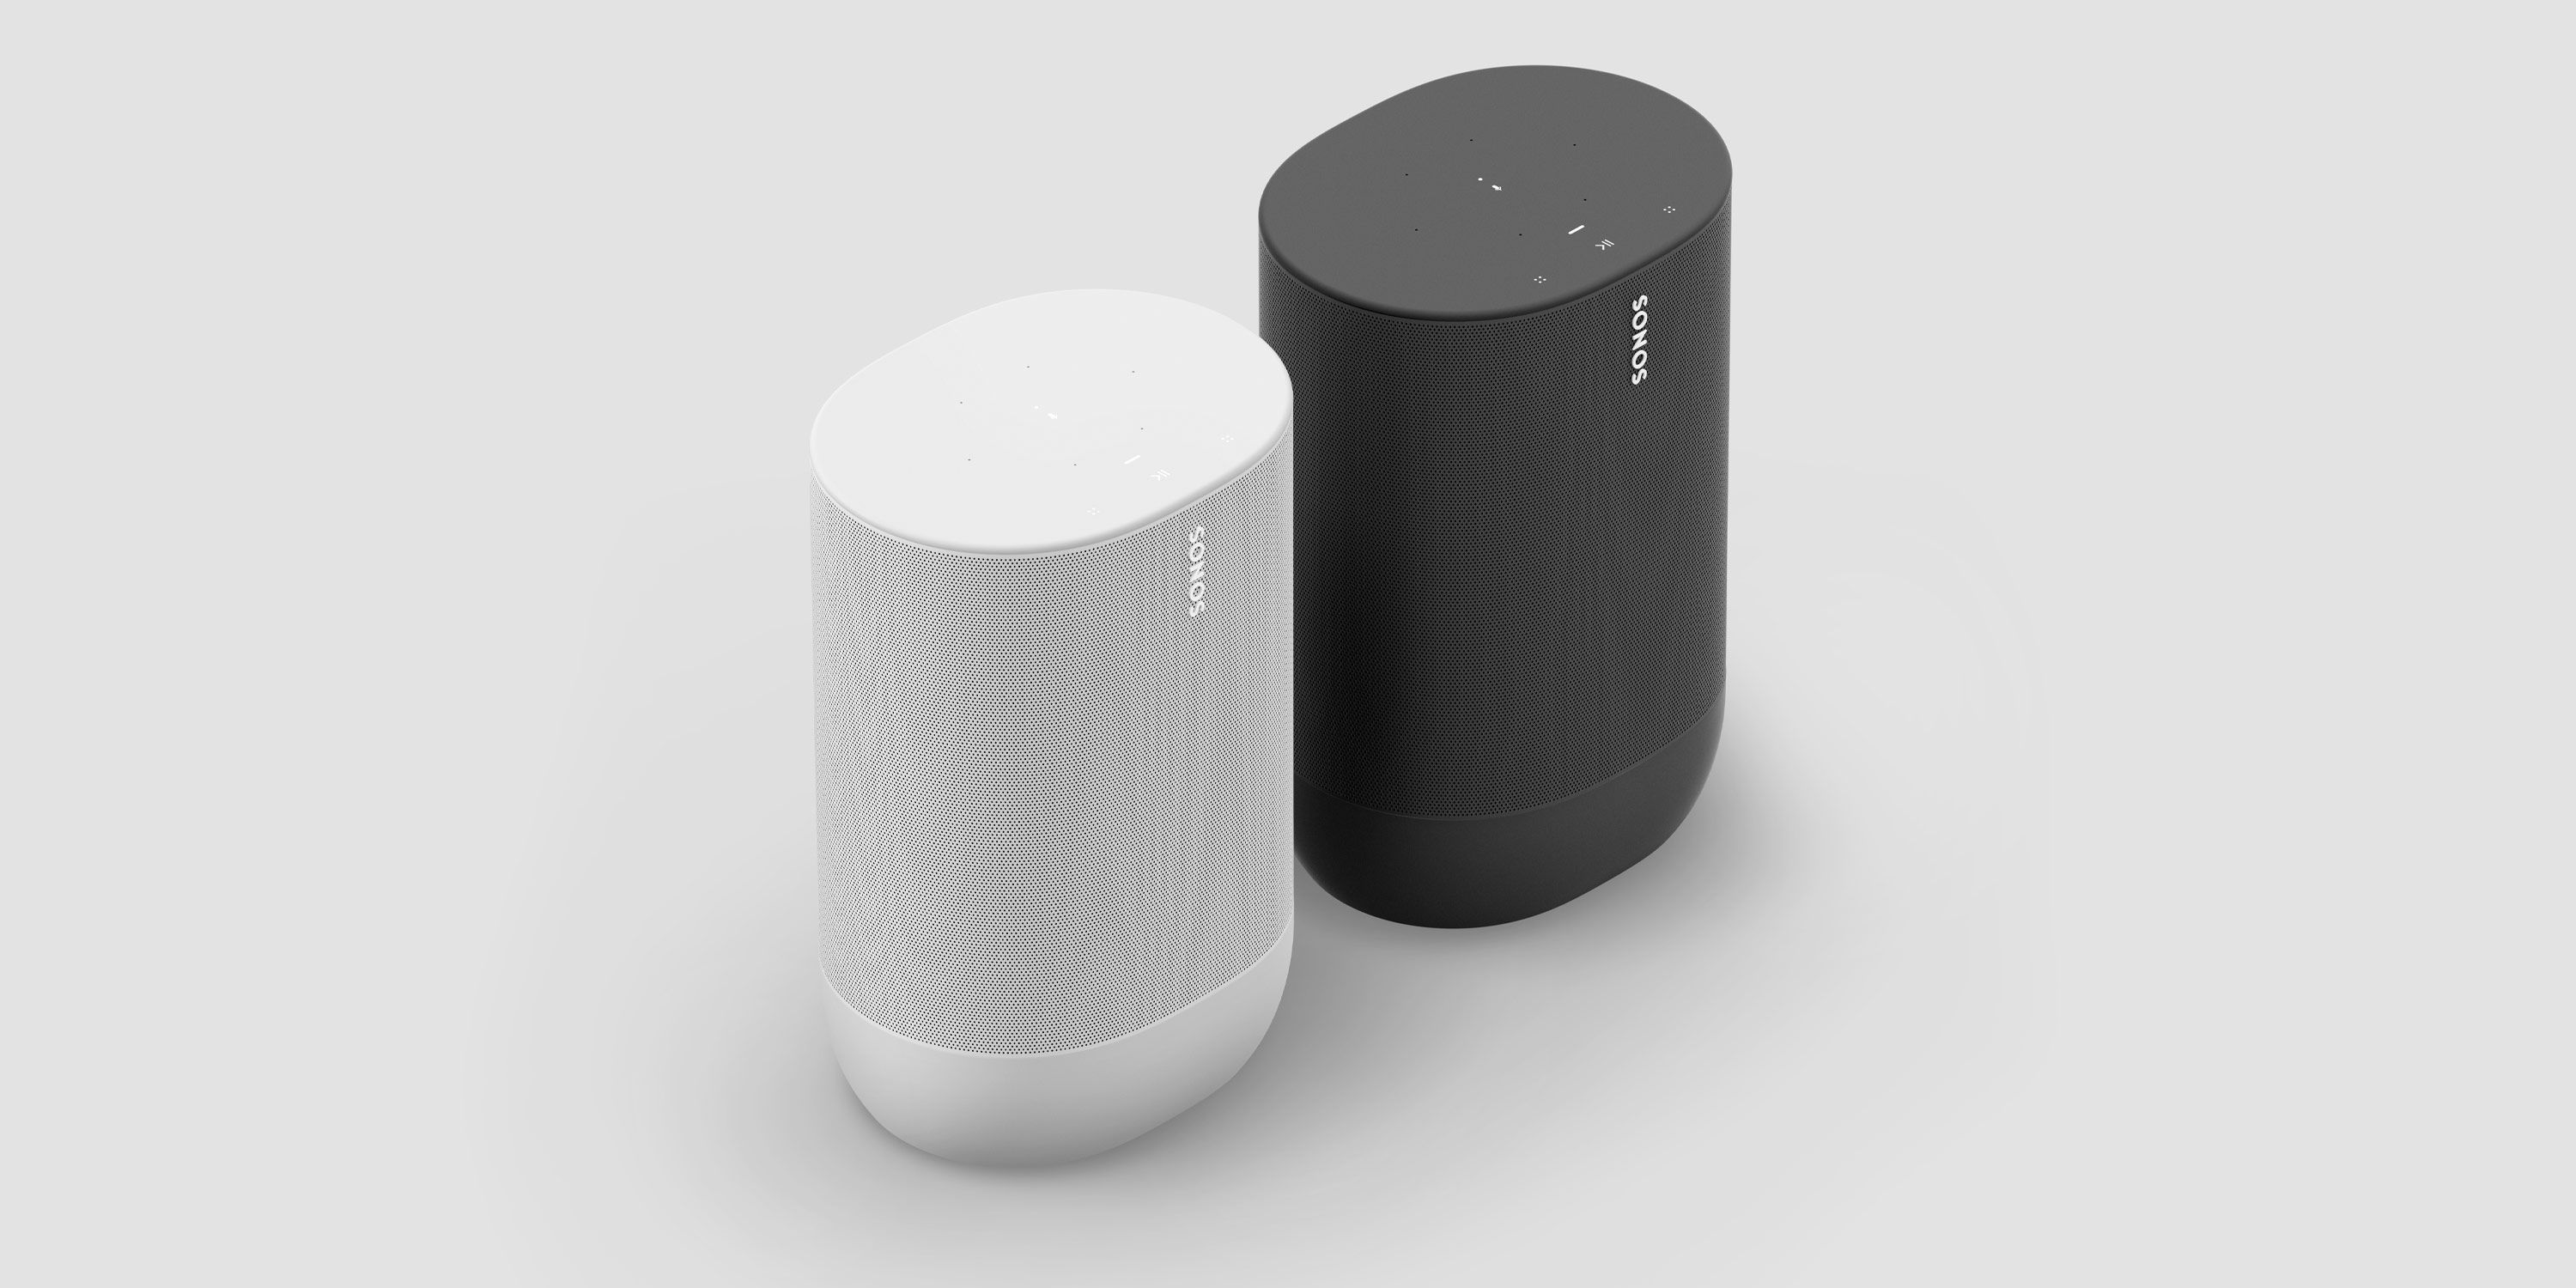 Sonos Has Something New Coming. Here's What We Know So